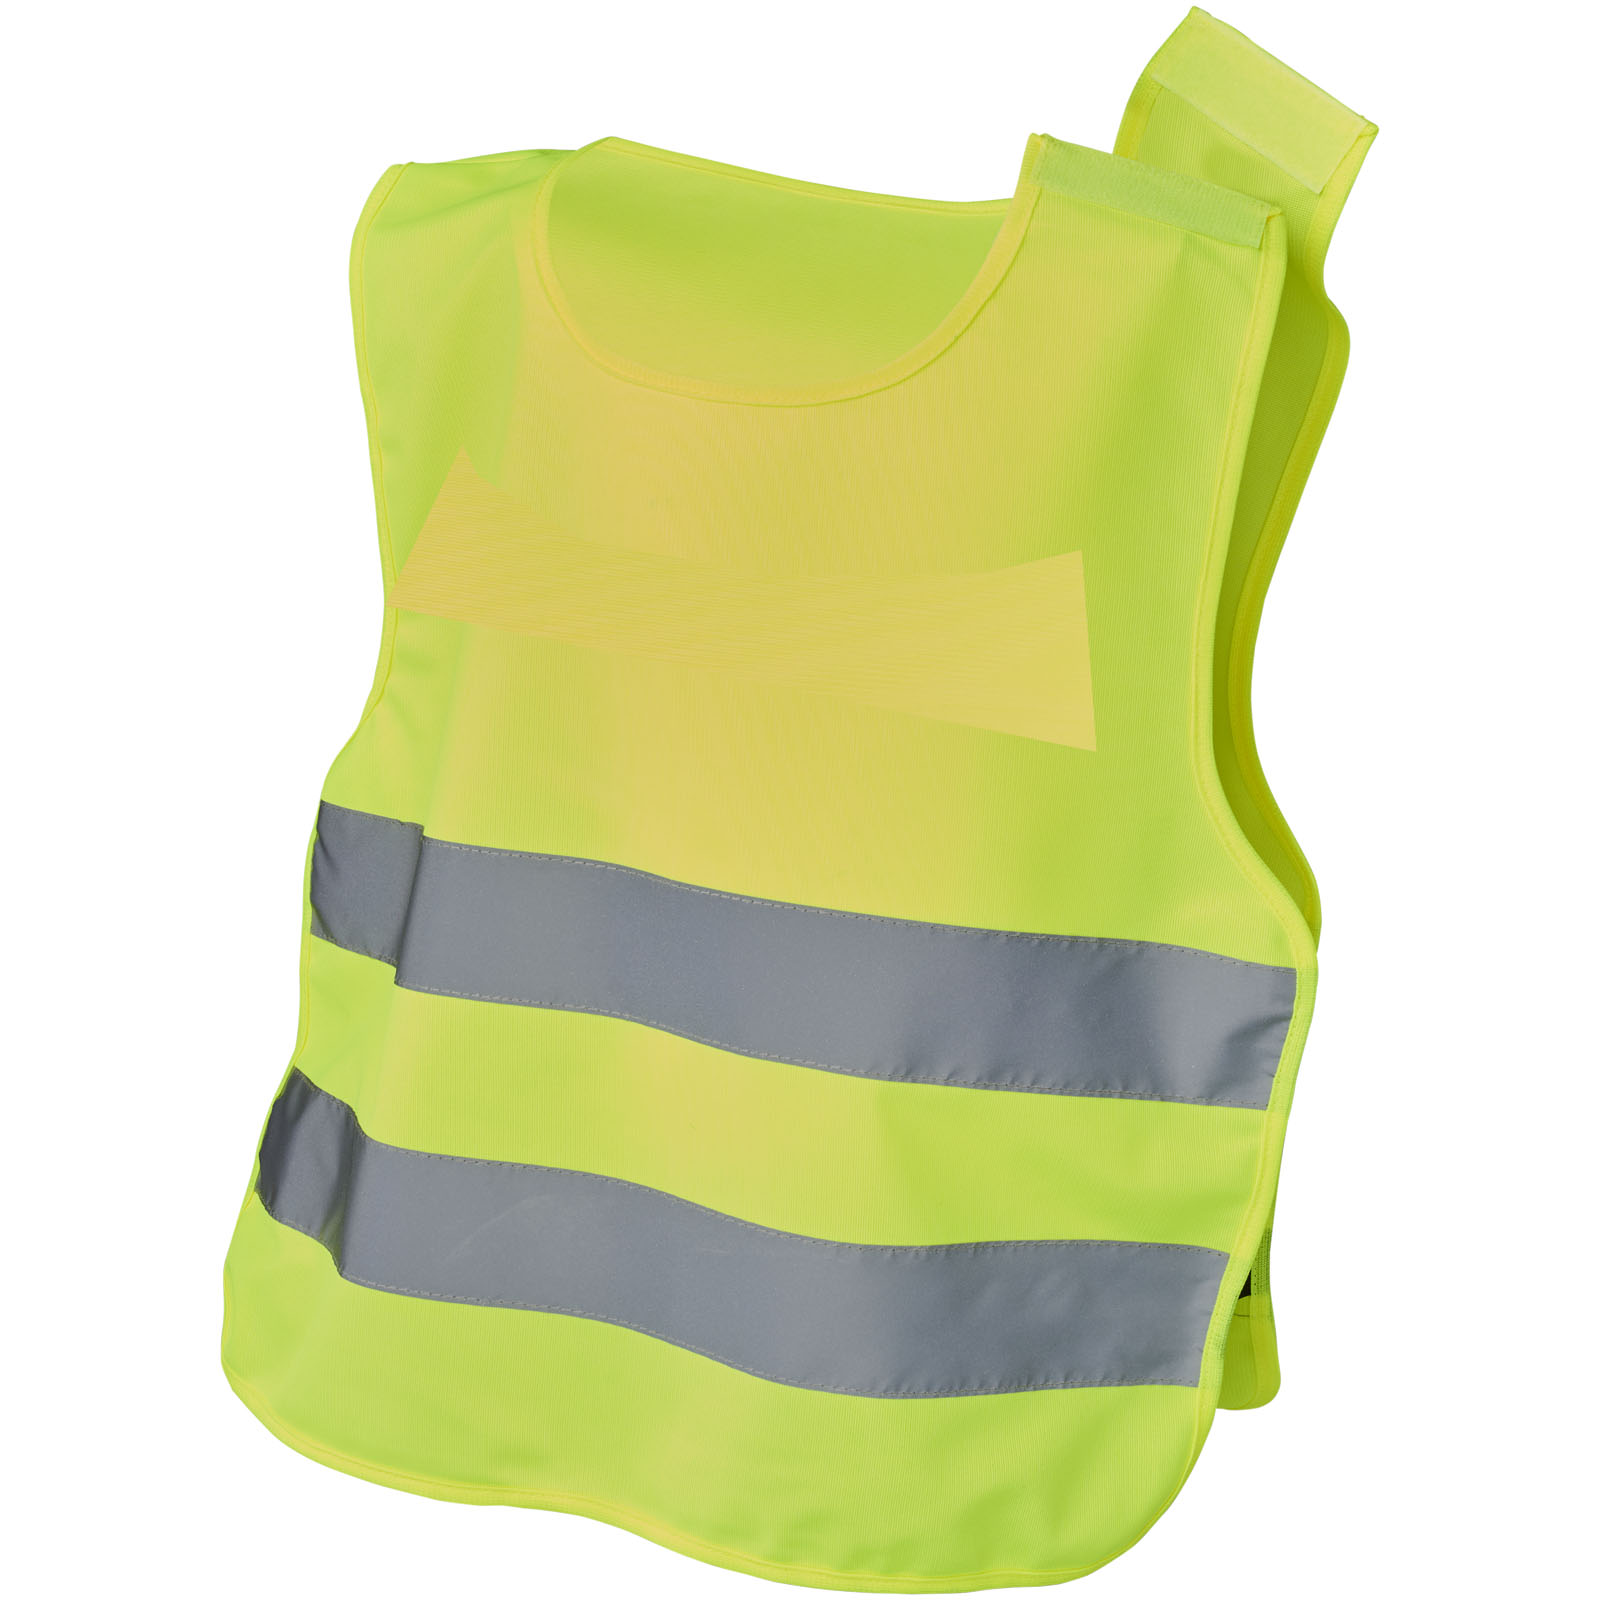 Advertising Safety Vests - RFX™ Odile XXS safety vest with hook&loop for kids age 3-6 - 3